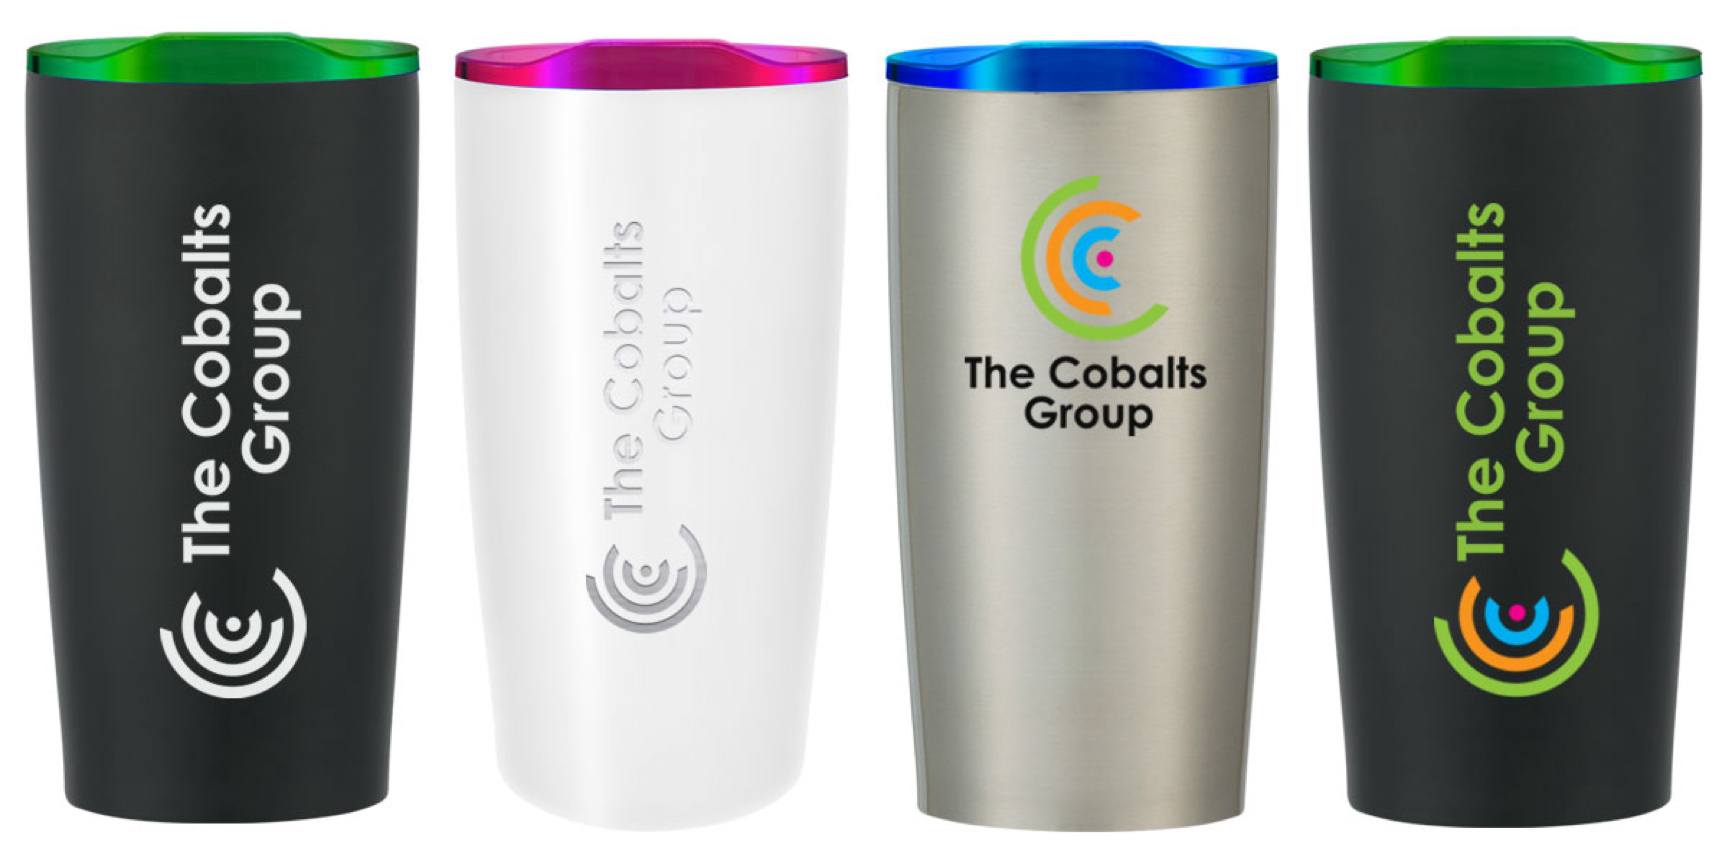 Promo tumblers with company logos